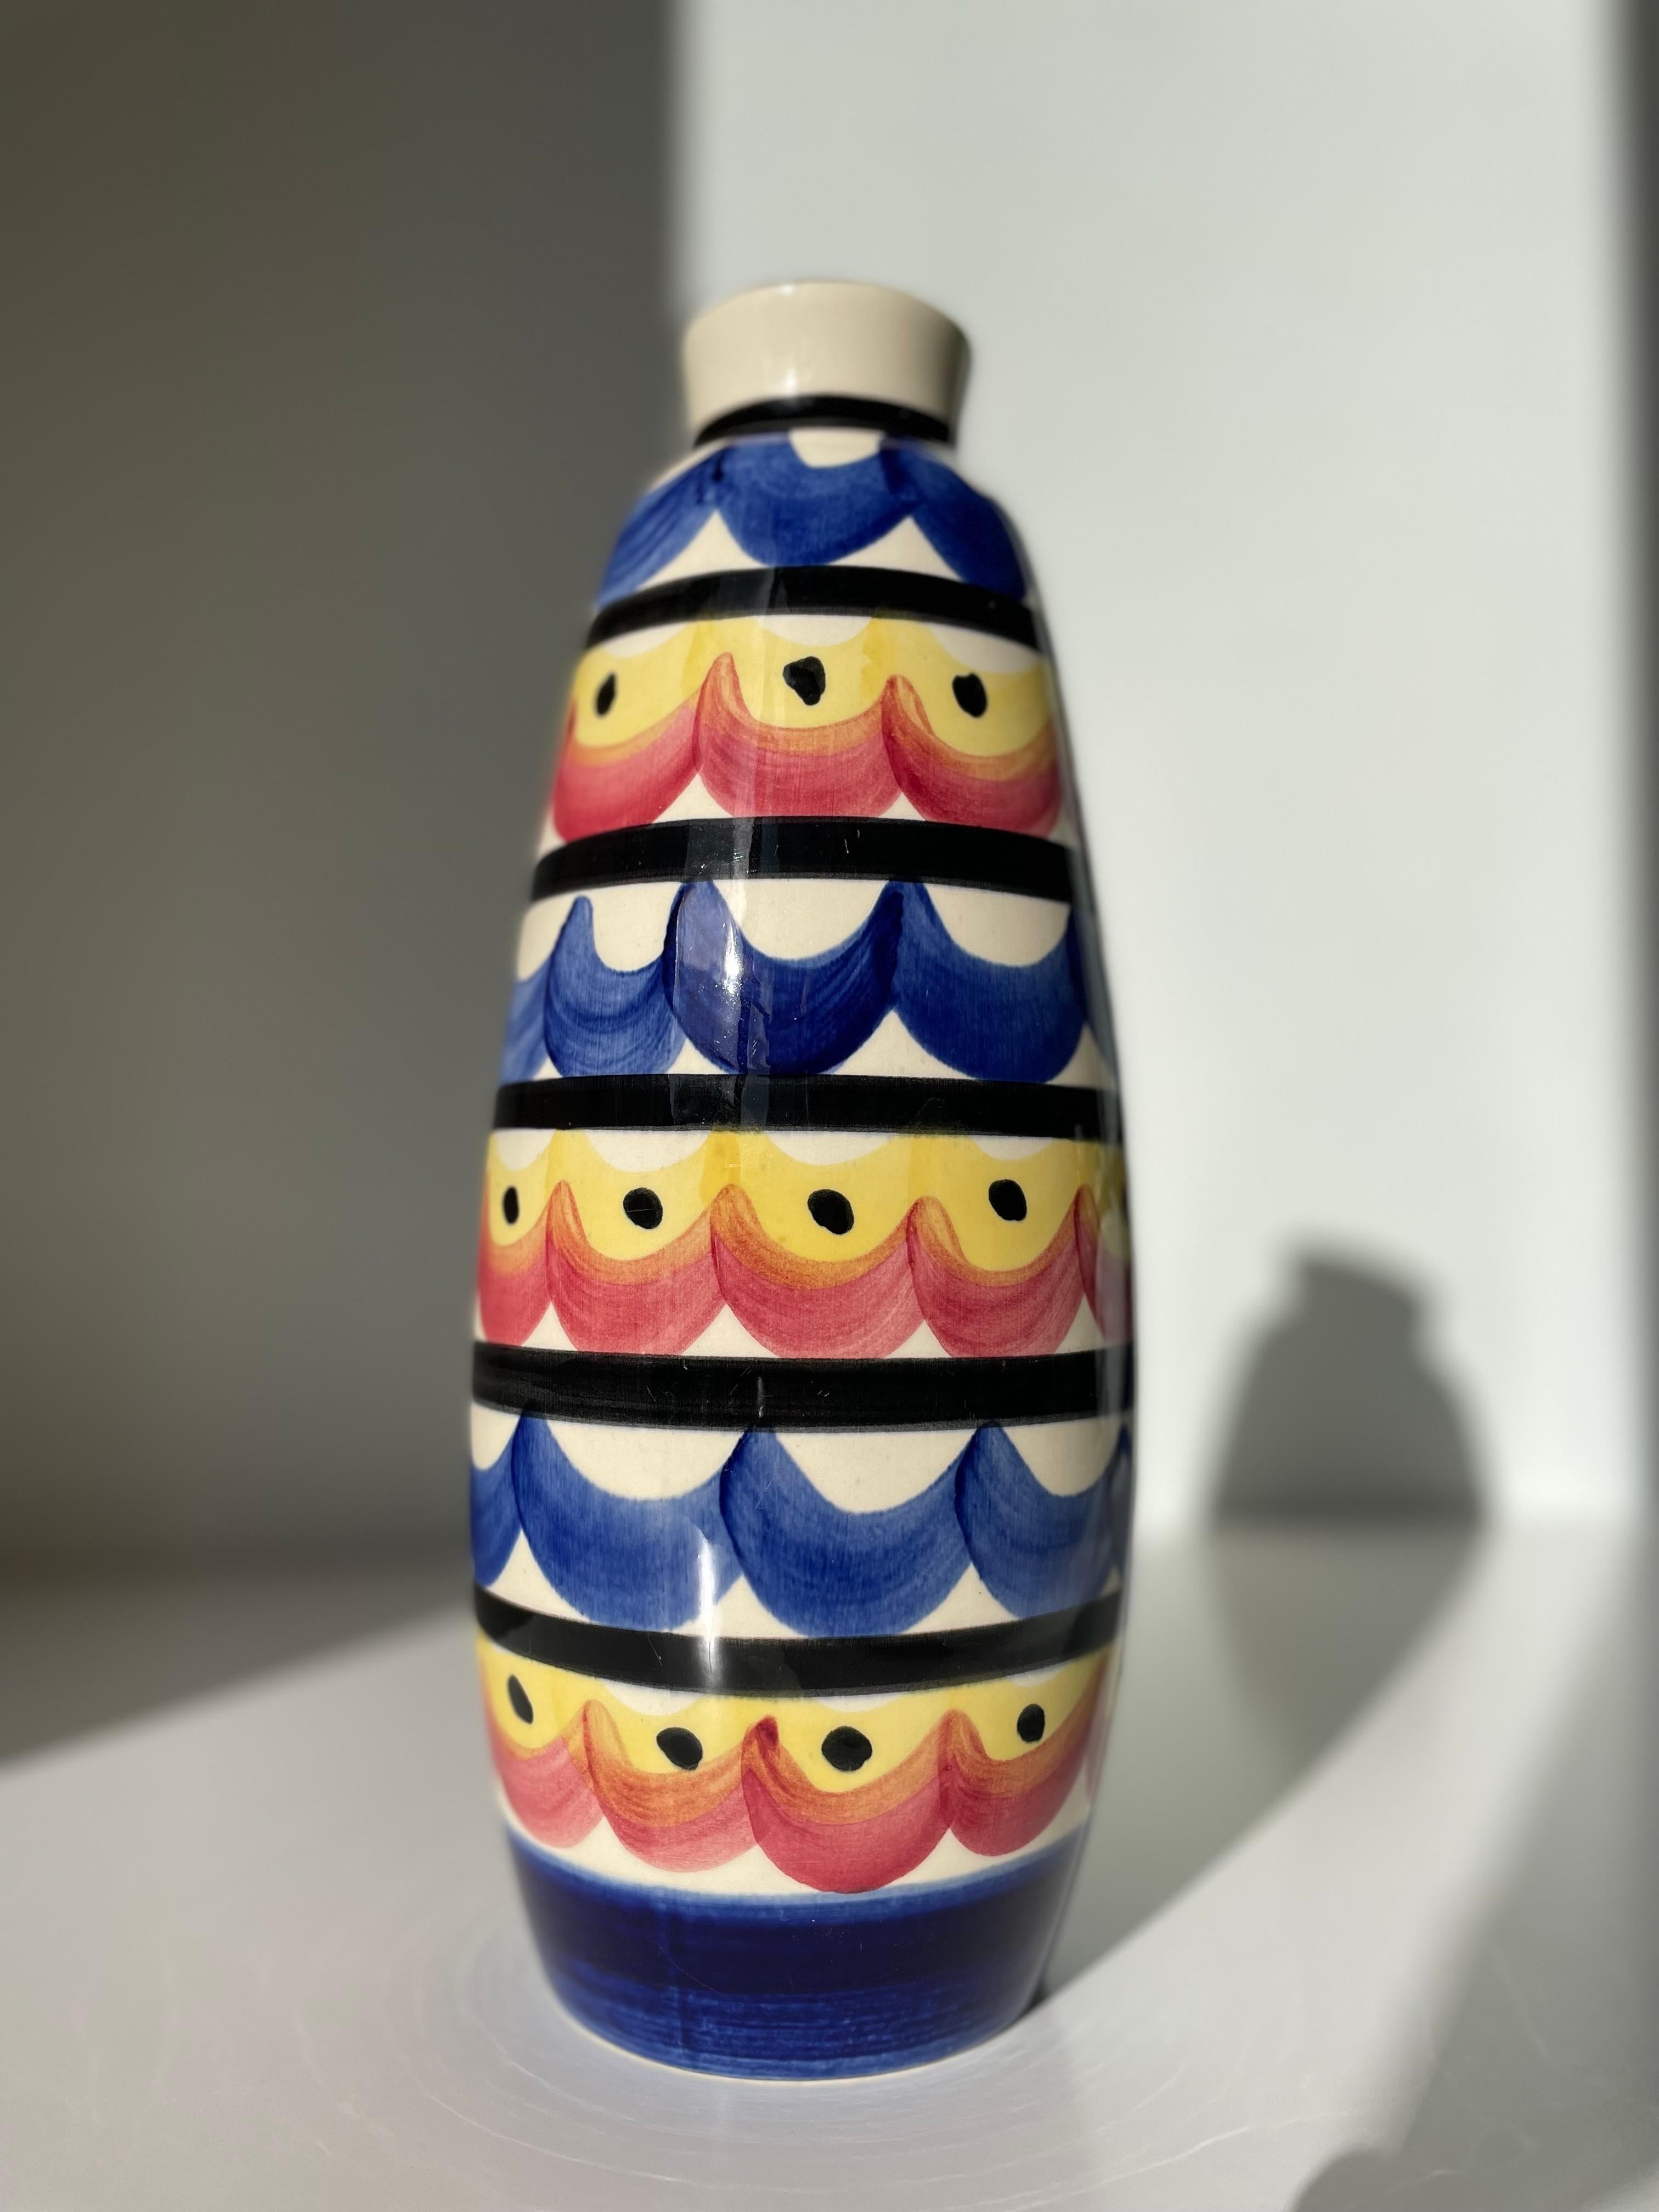 Large Strehla Colorful Maximalist Vase by Strehla, 1970s For Sale 4